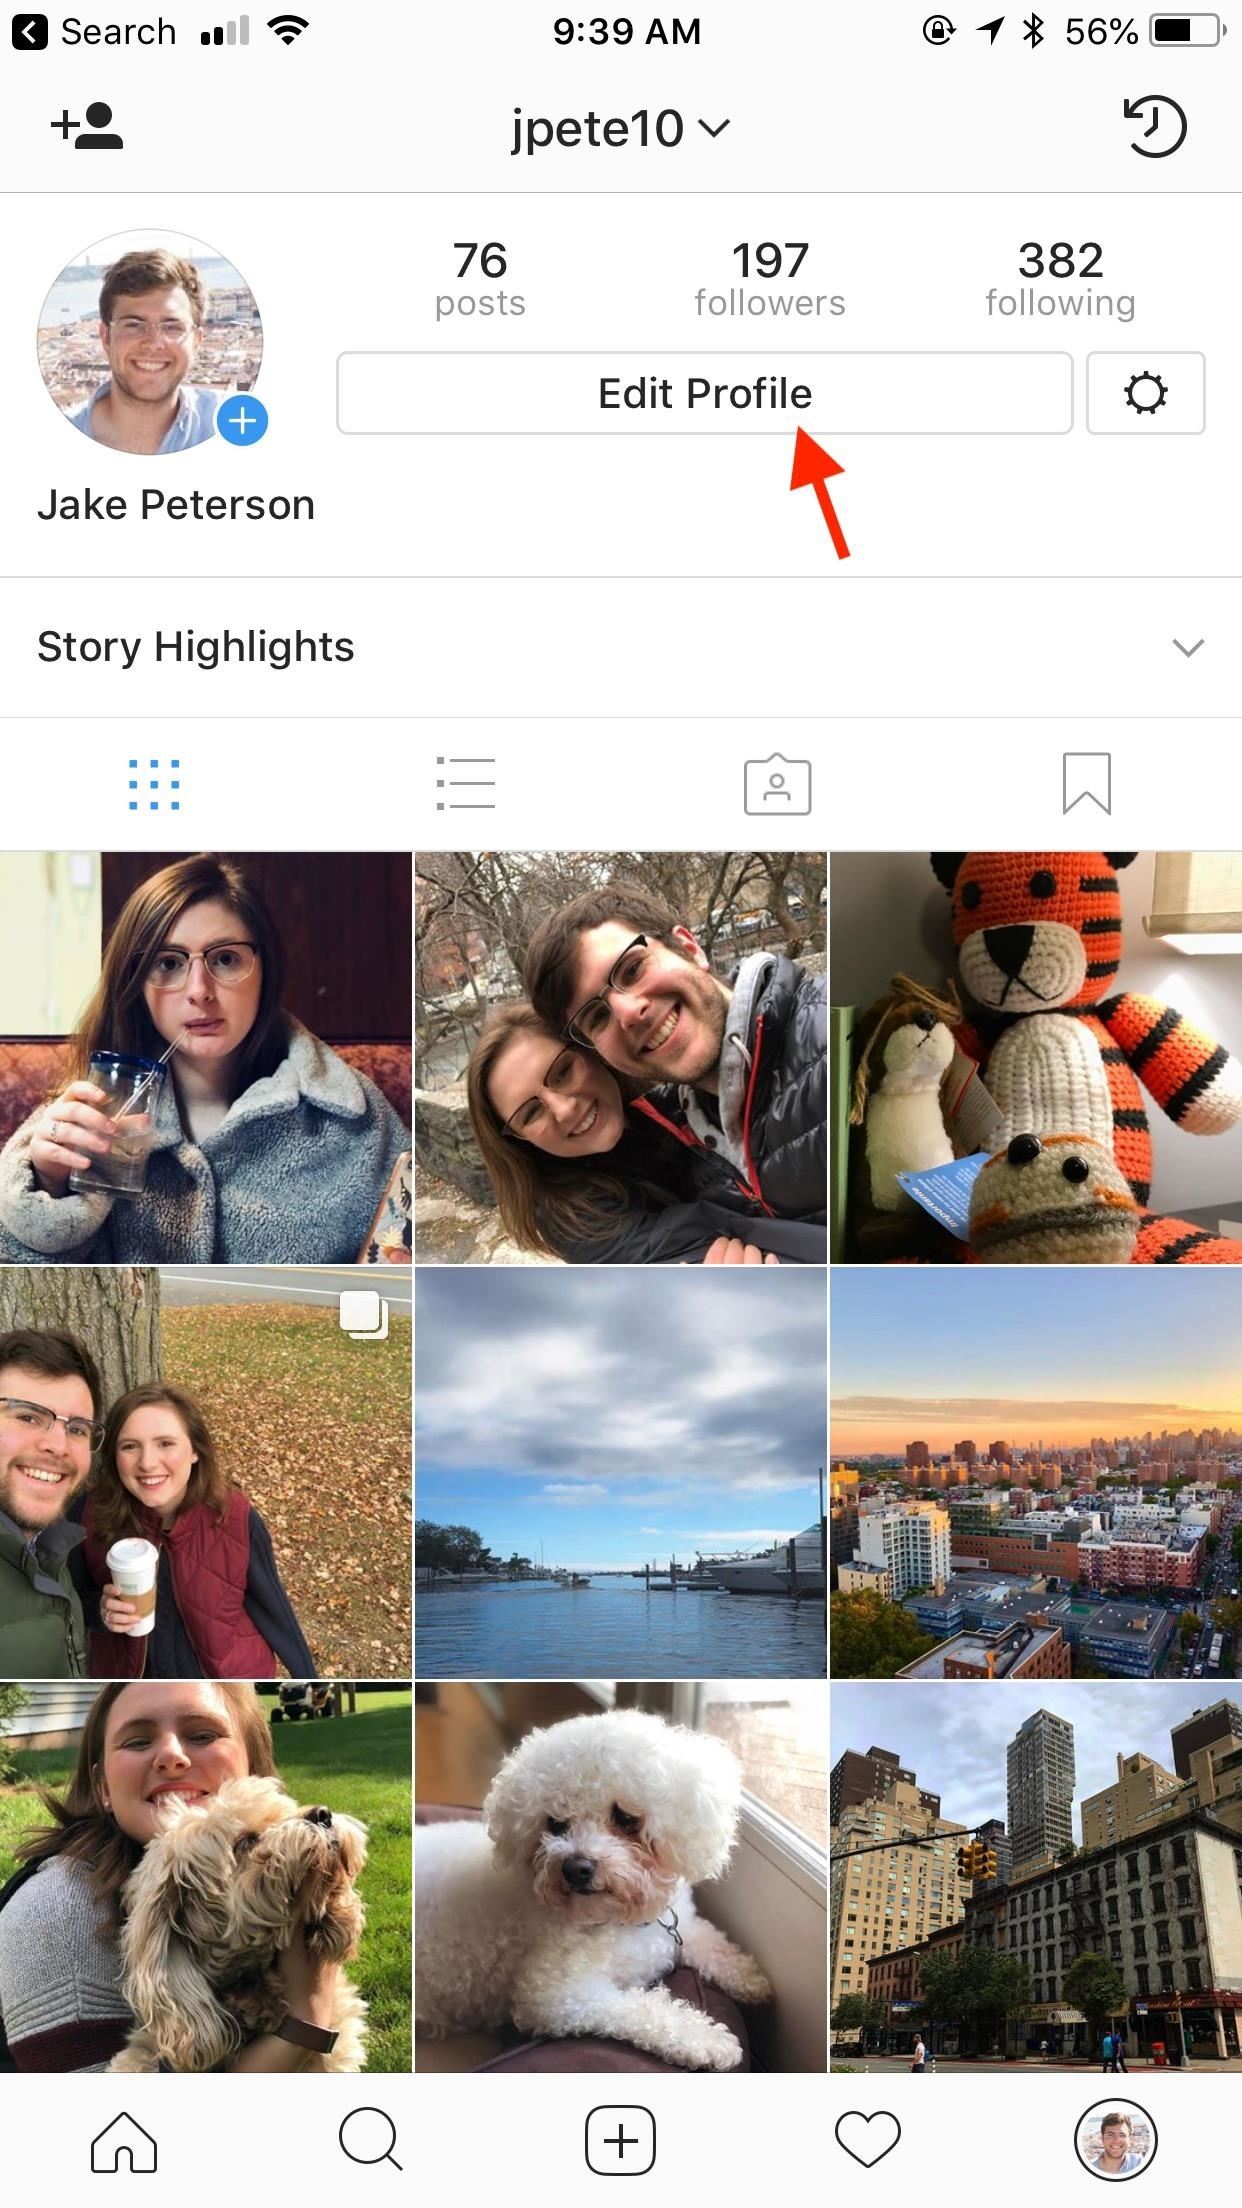 Instagram 101: How to Add #Hashtags & @Account Tags to Your Bio